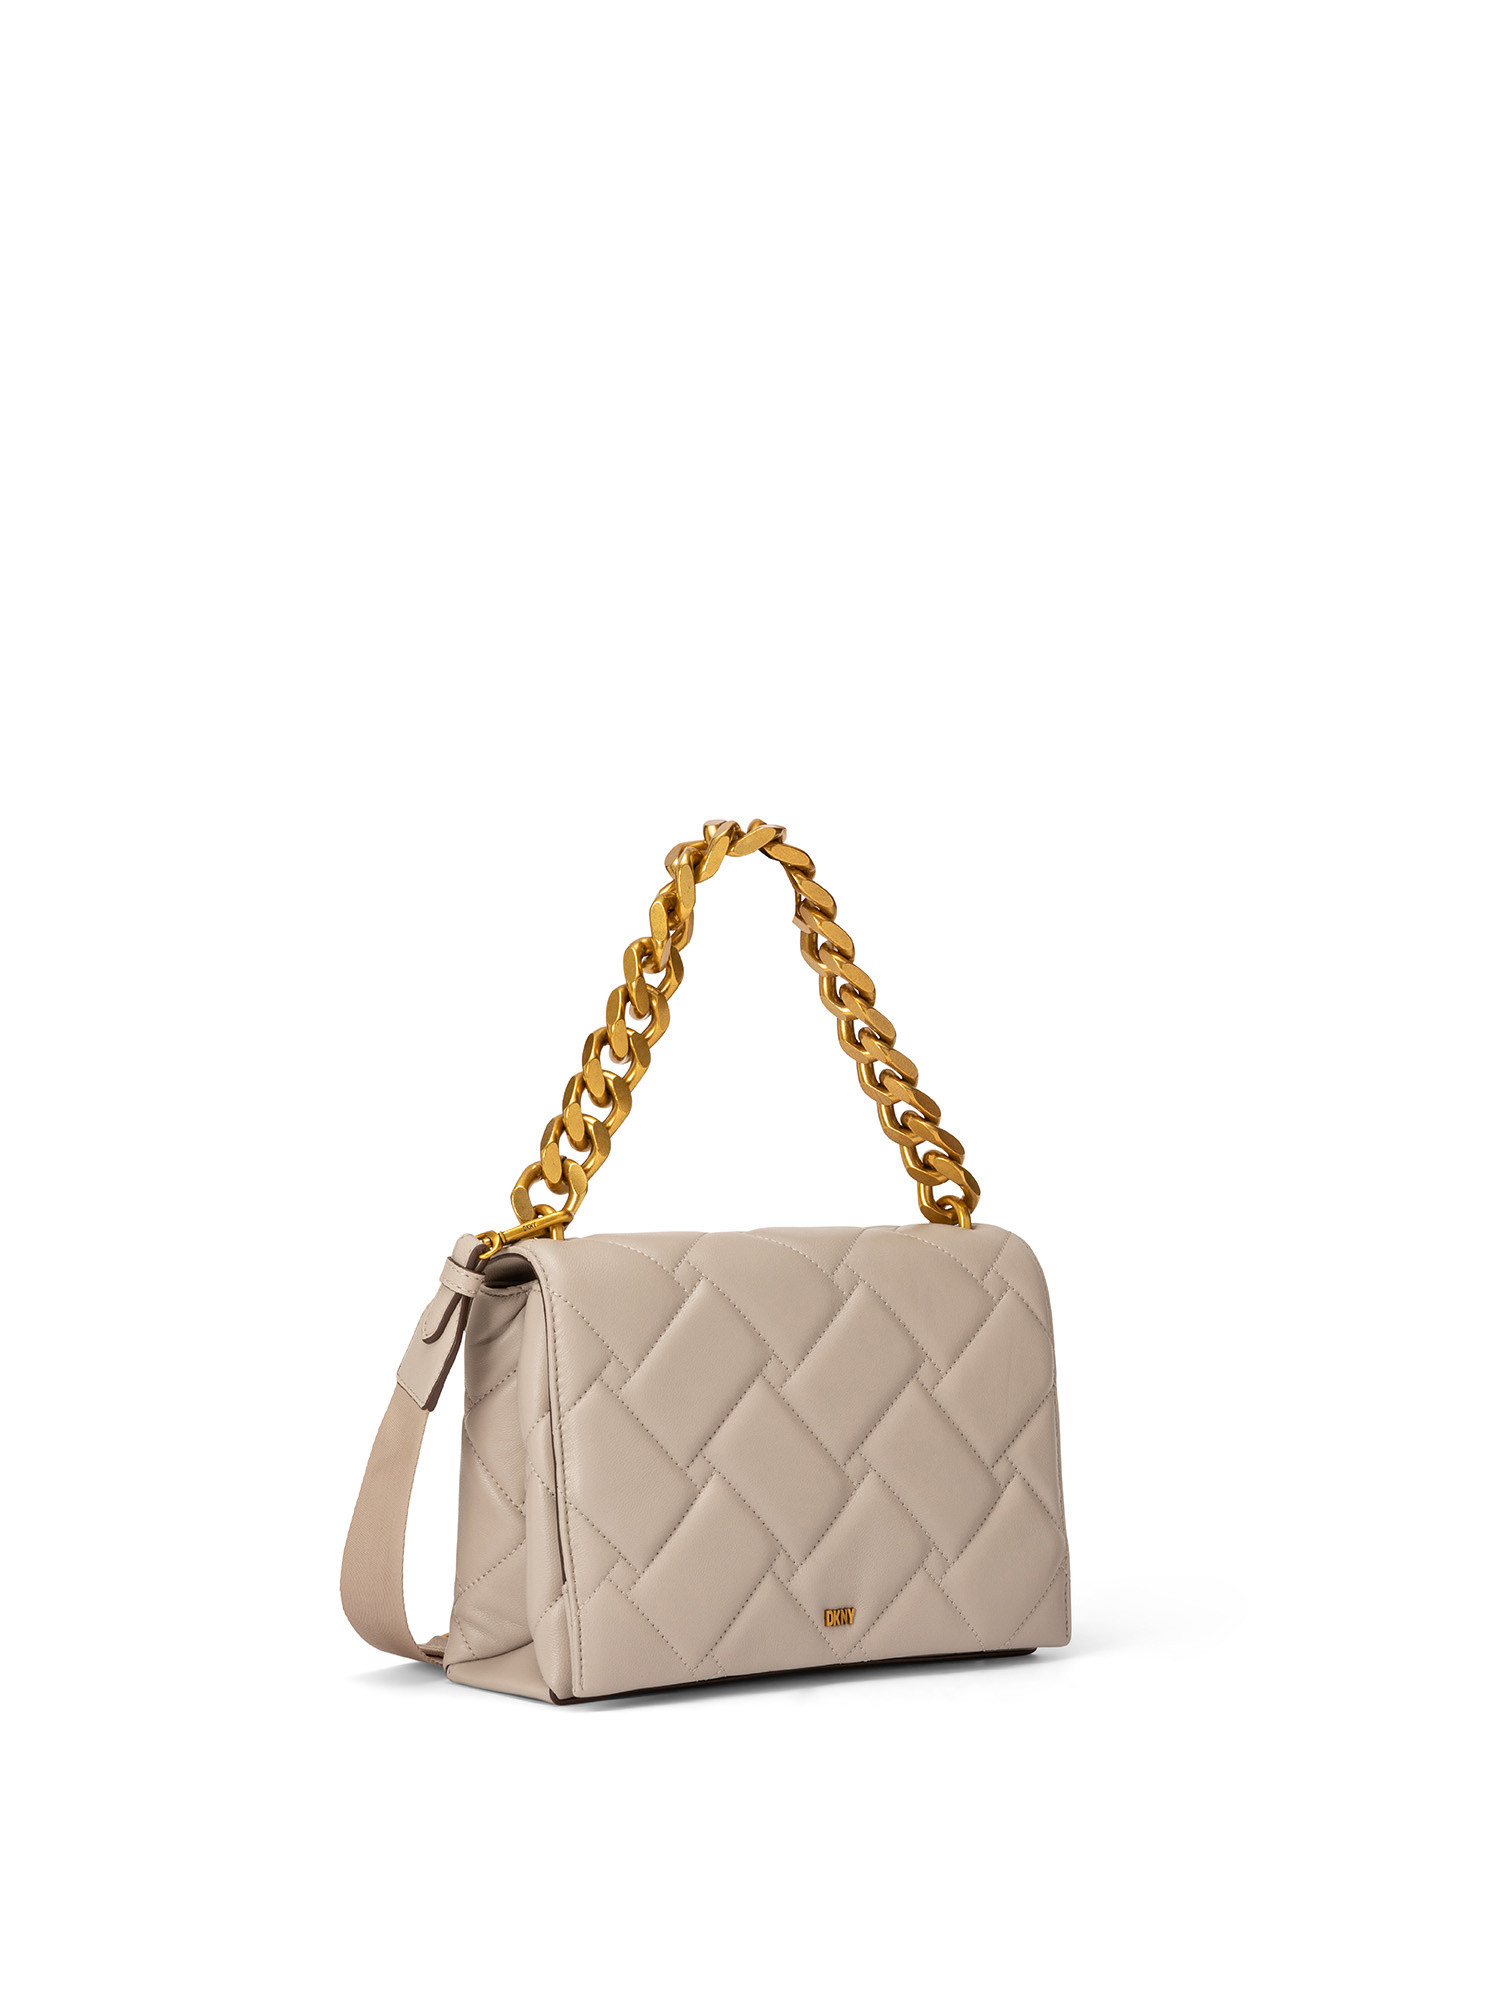 DKNY - Borsa Willow a tracolla, Beige, large image number 1